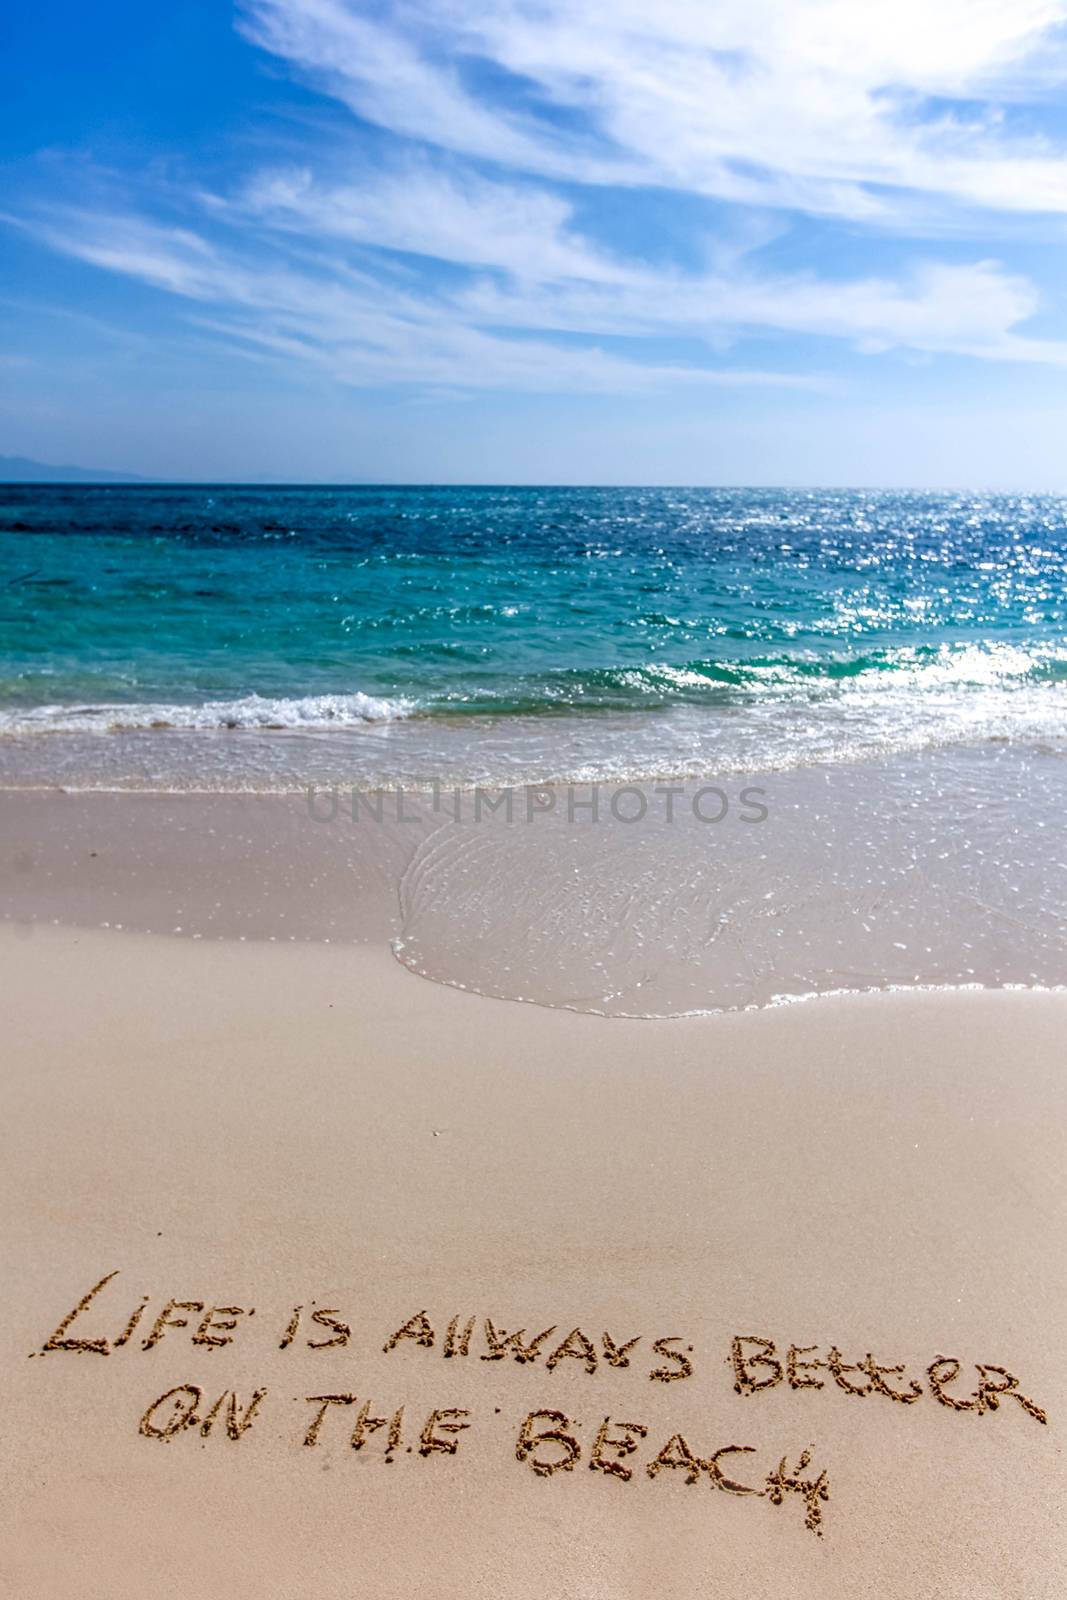 Life is always better on the beach written on the sand of tropical sea beach